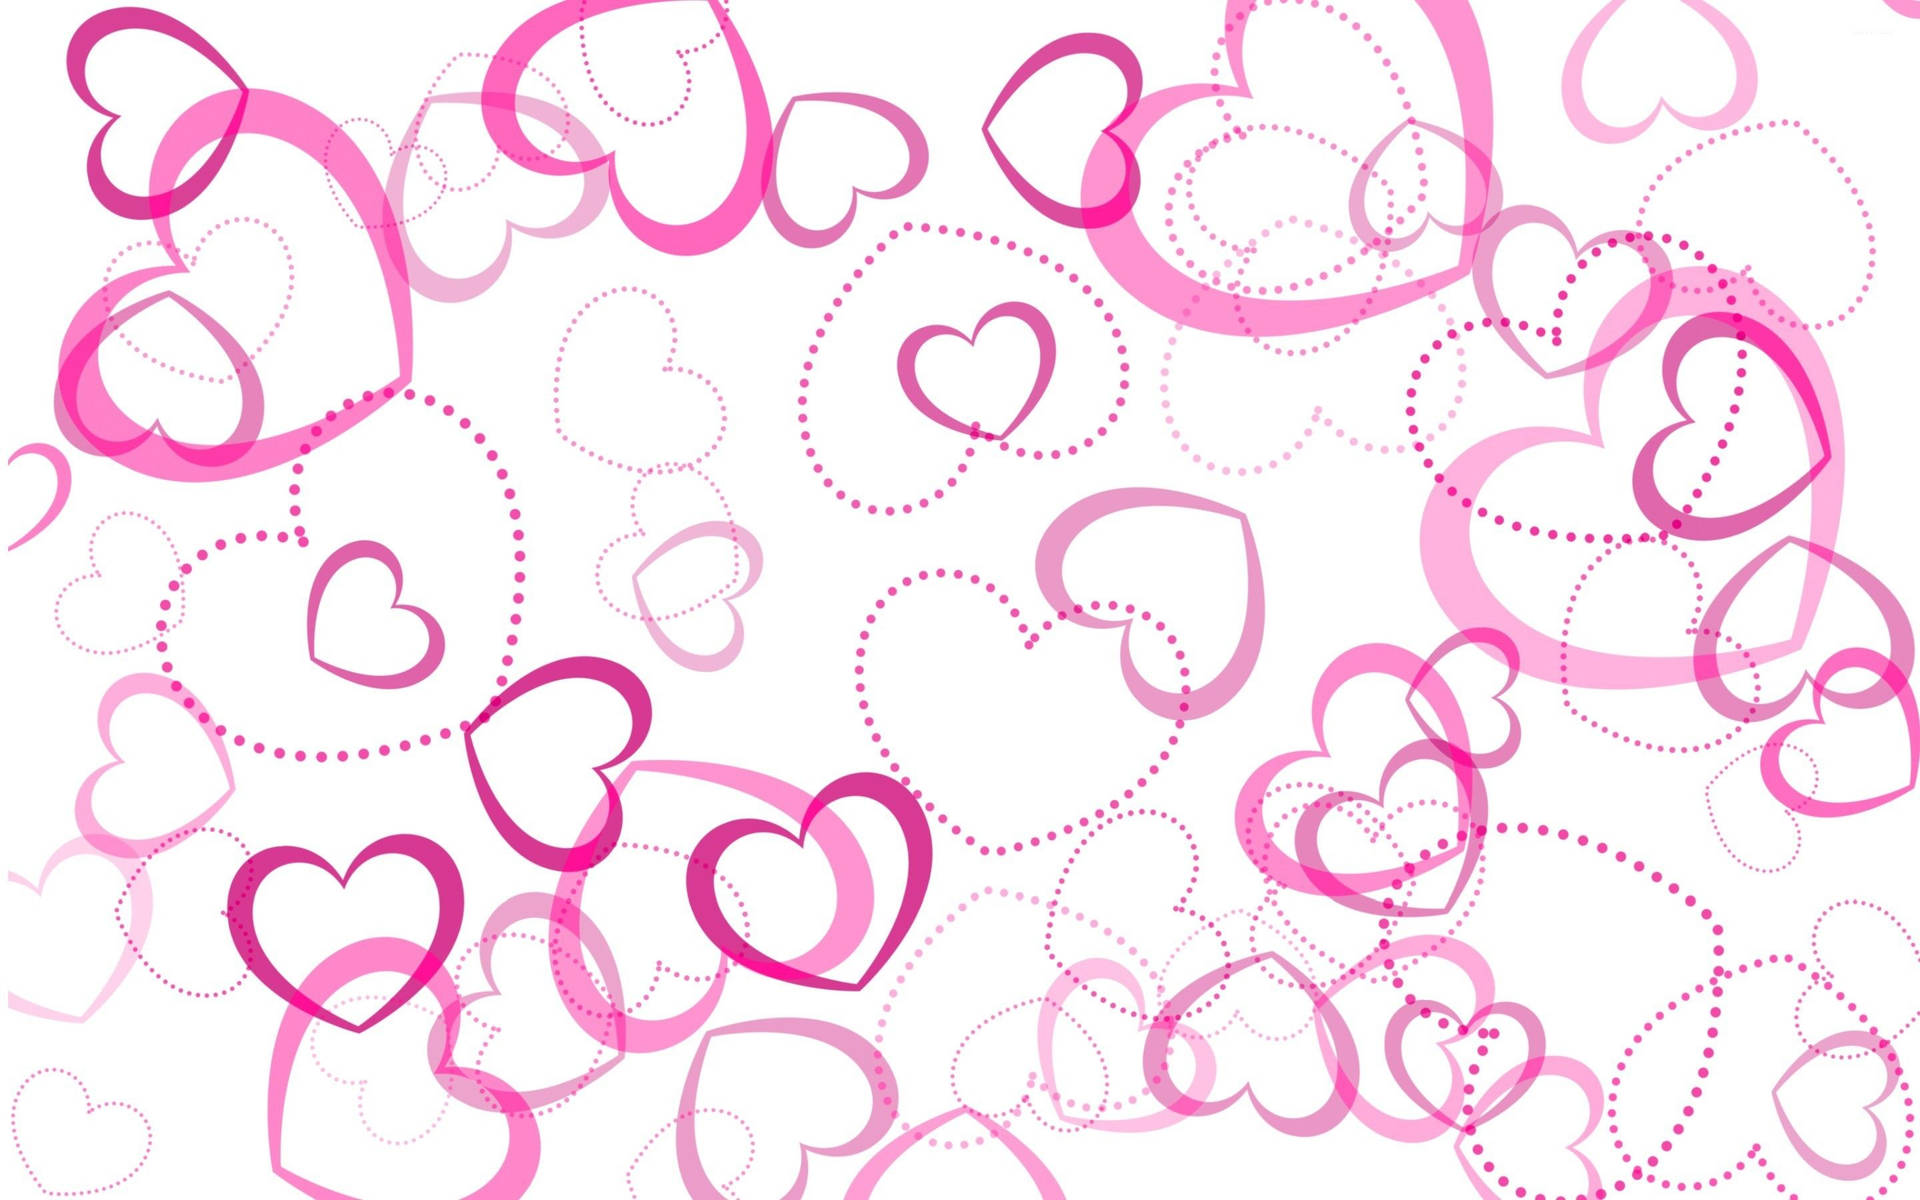 Showing Love And Appreciation #happyvalentinesday Background